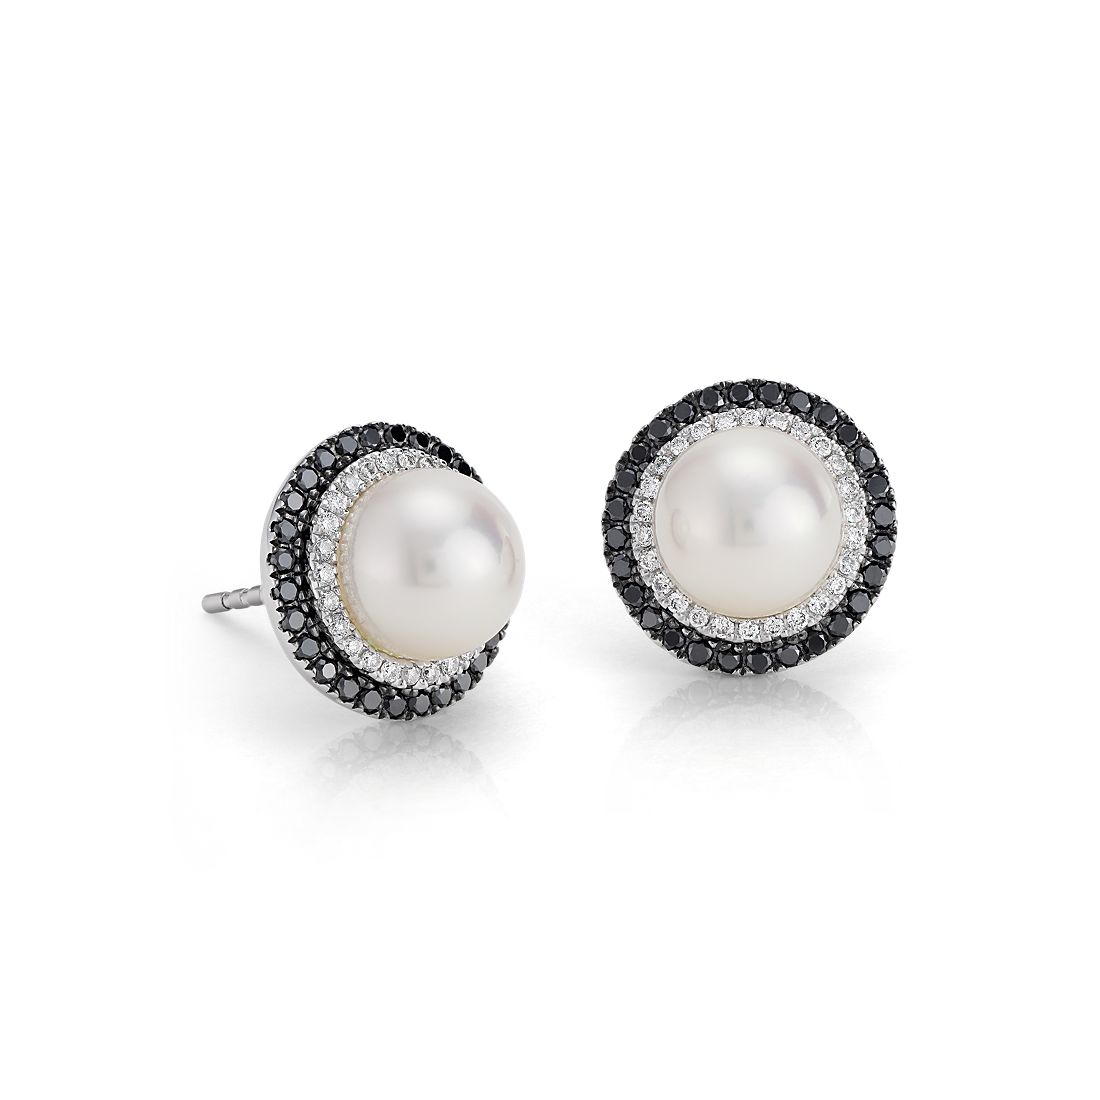 Freshwater Cultured Pearl and Diamond Stud Earrings in 14k White Gold (7mm)